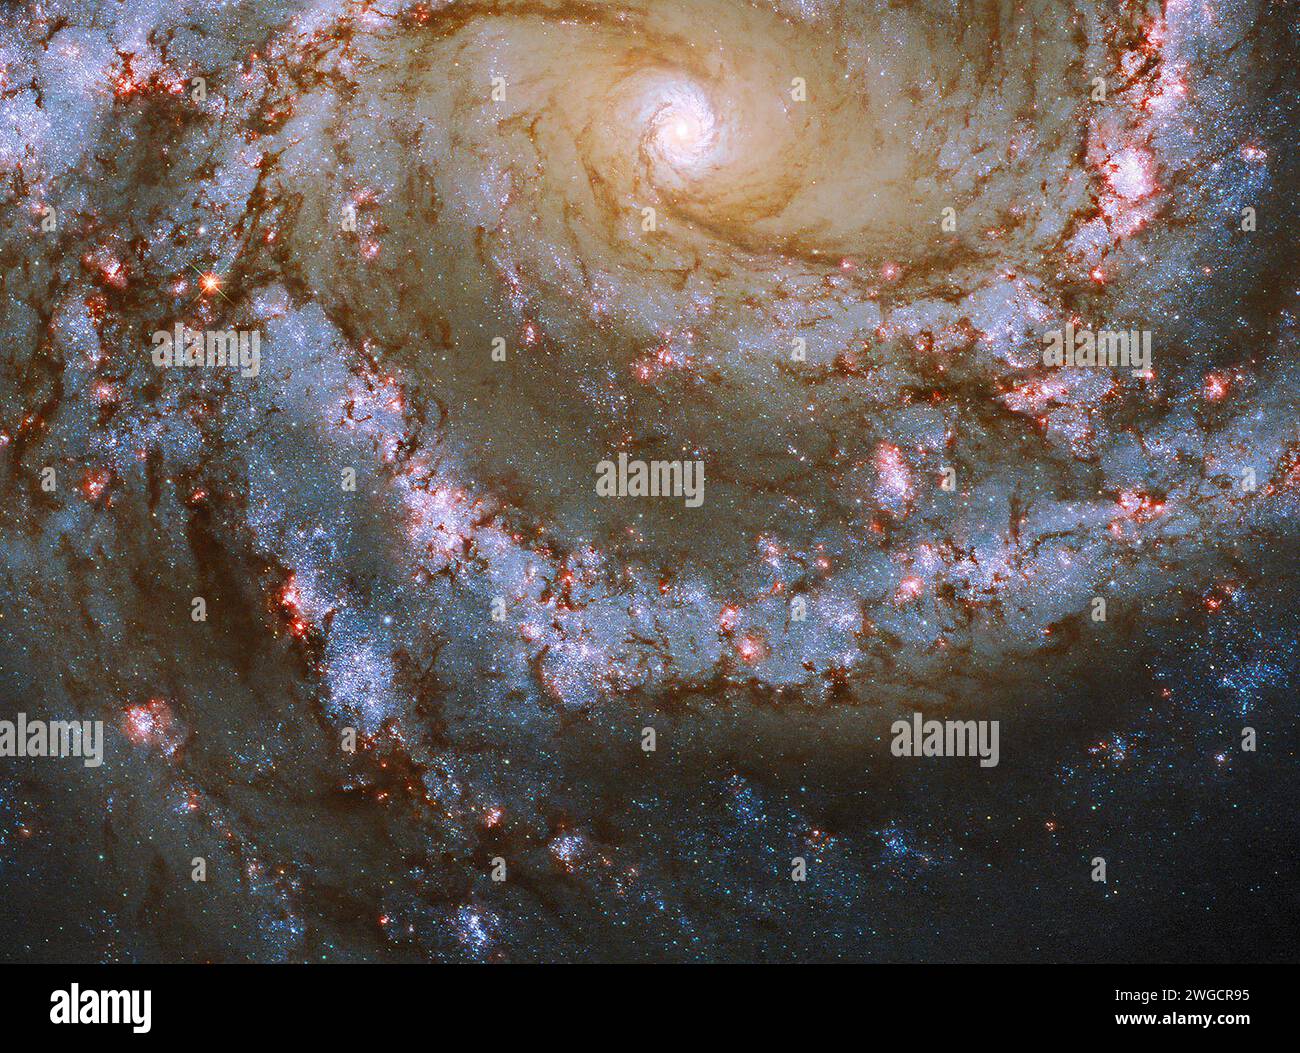 Face-on spiral galaxy, NGC 4303. Bright blue, pink and red galactic long-range captured imagery. Elements of this image furnished by NASA (observed by Stock Photo